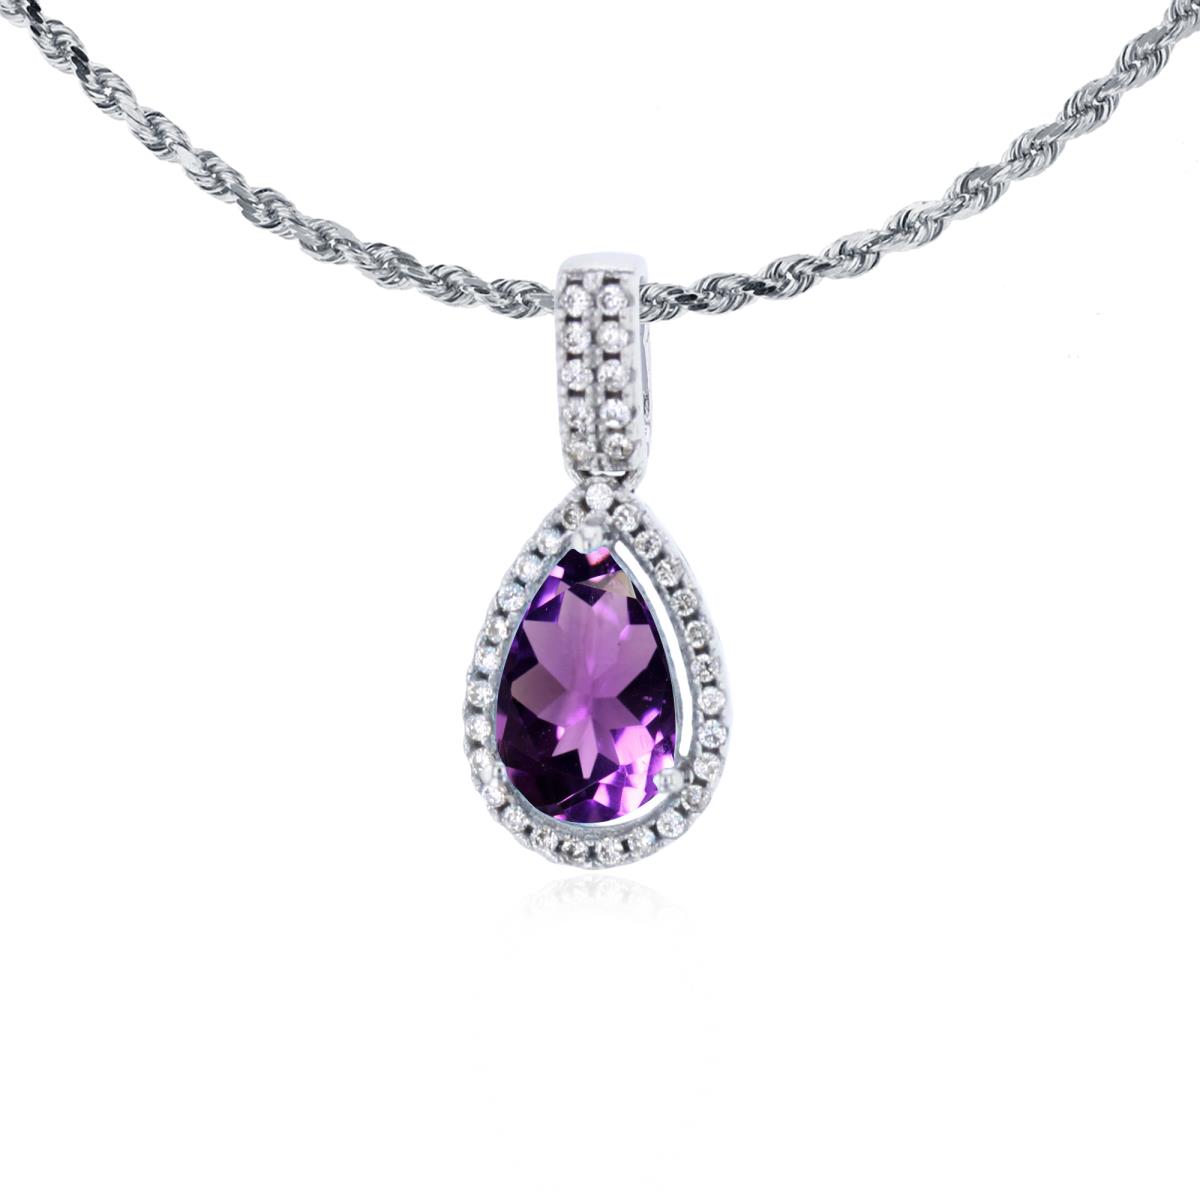 14K White Gold 8x5mm Pear Cut Amethyst & 0.11 CTTW Diamond Halo 18" Rope Chain Necklace